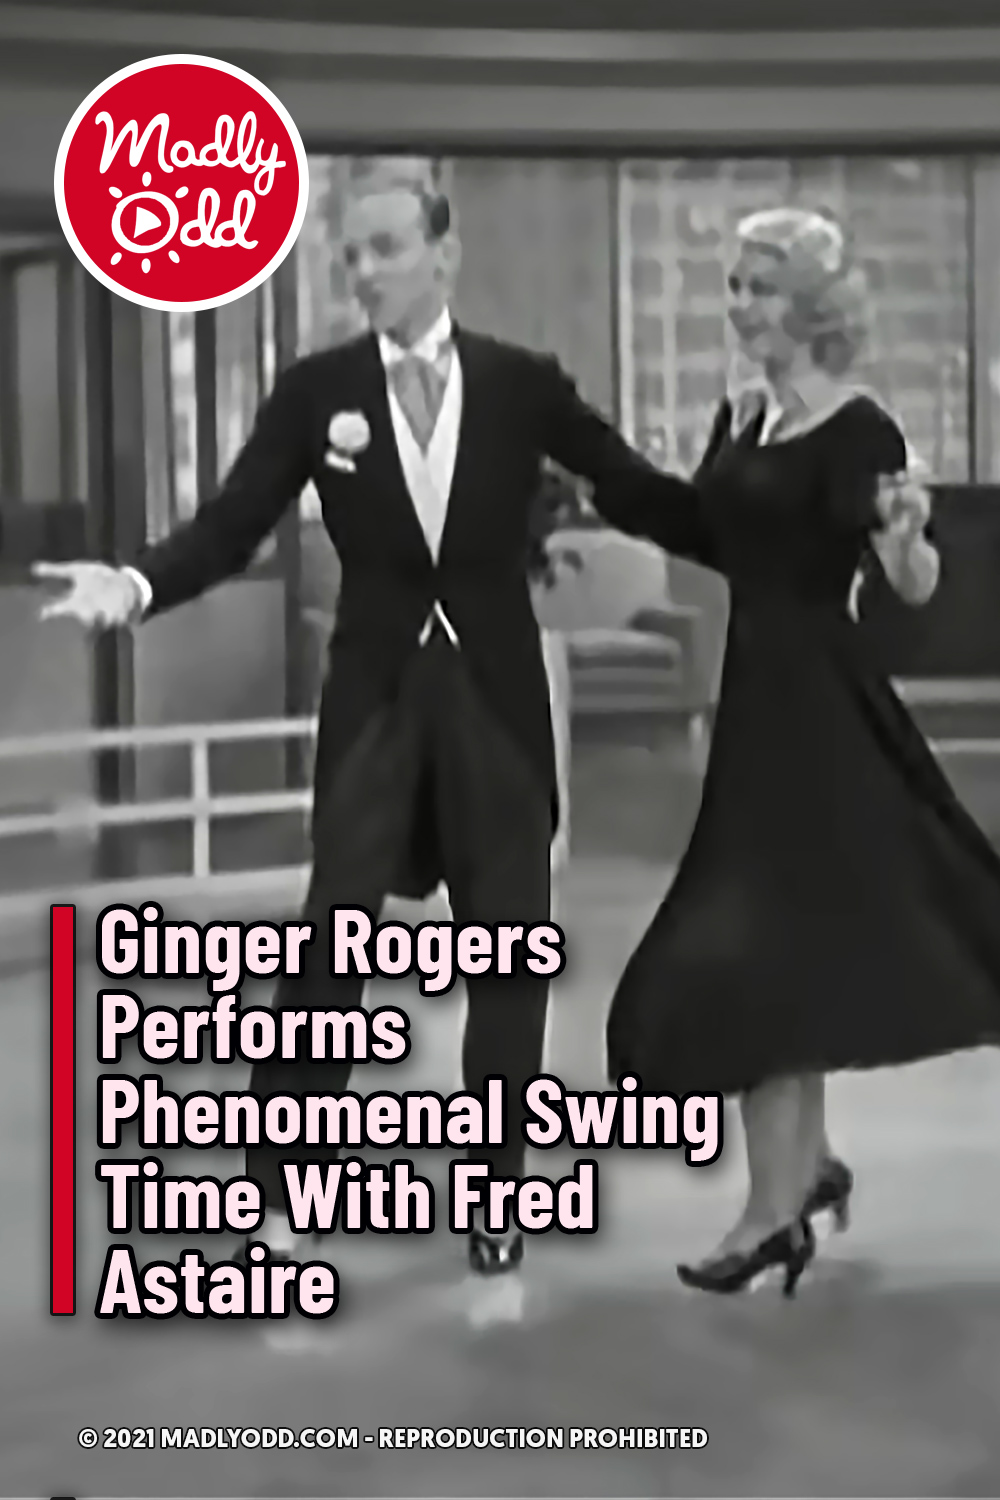 Ginger Rogers Performs Phenomenal Swing Time With Fred Astaire